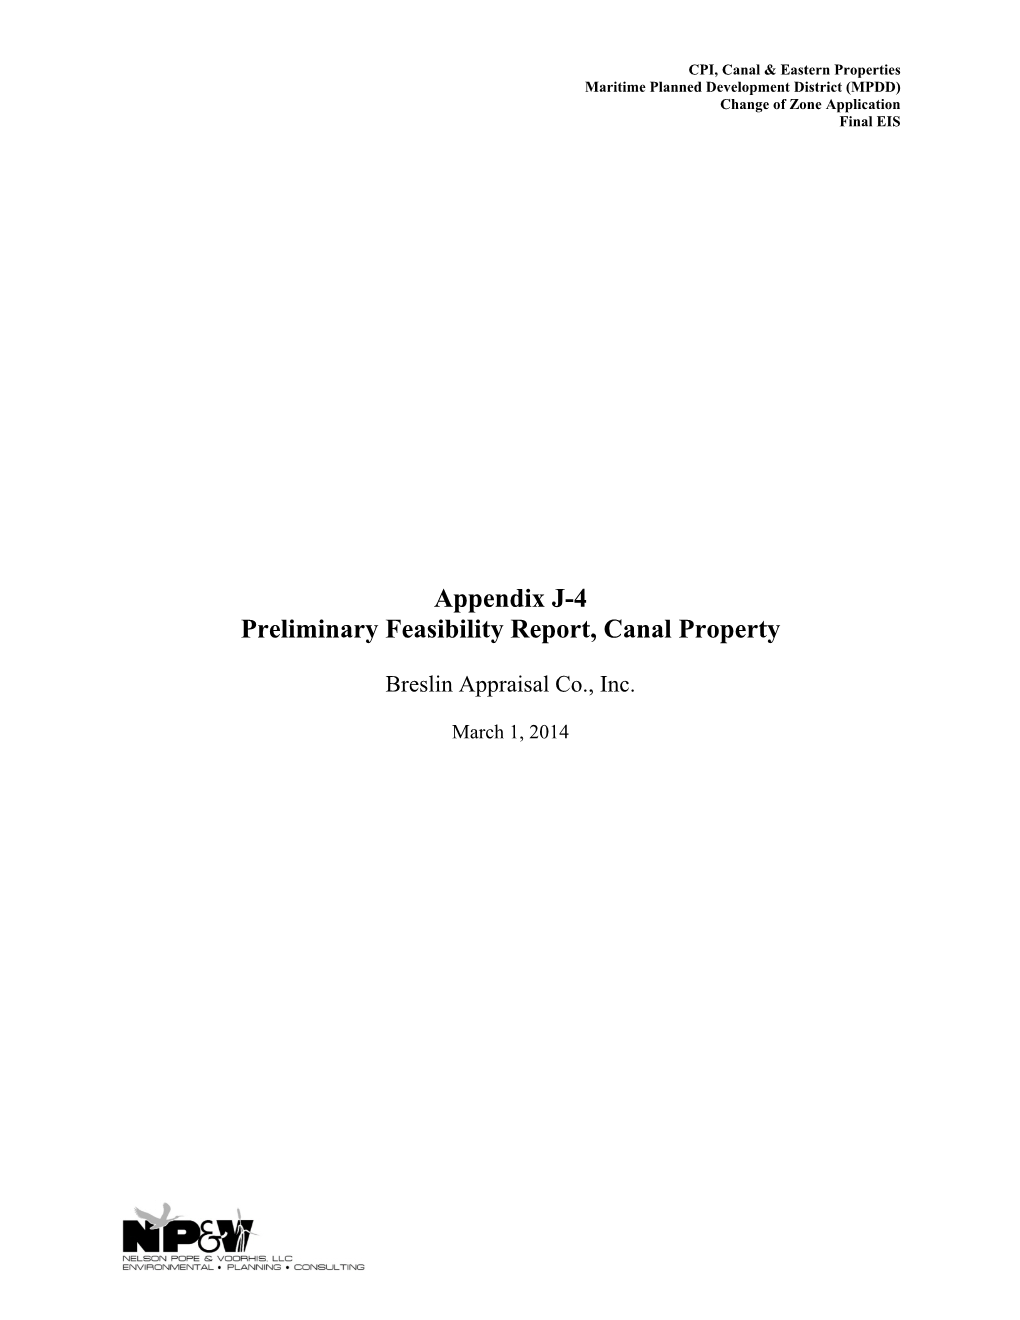 Appendix J-4 Preliminary Feasibility Report, Canal Property